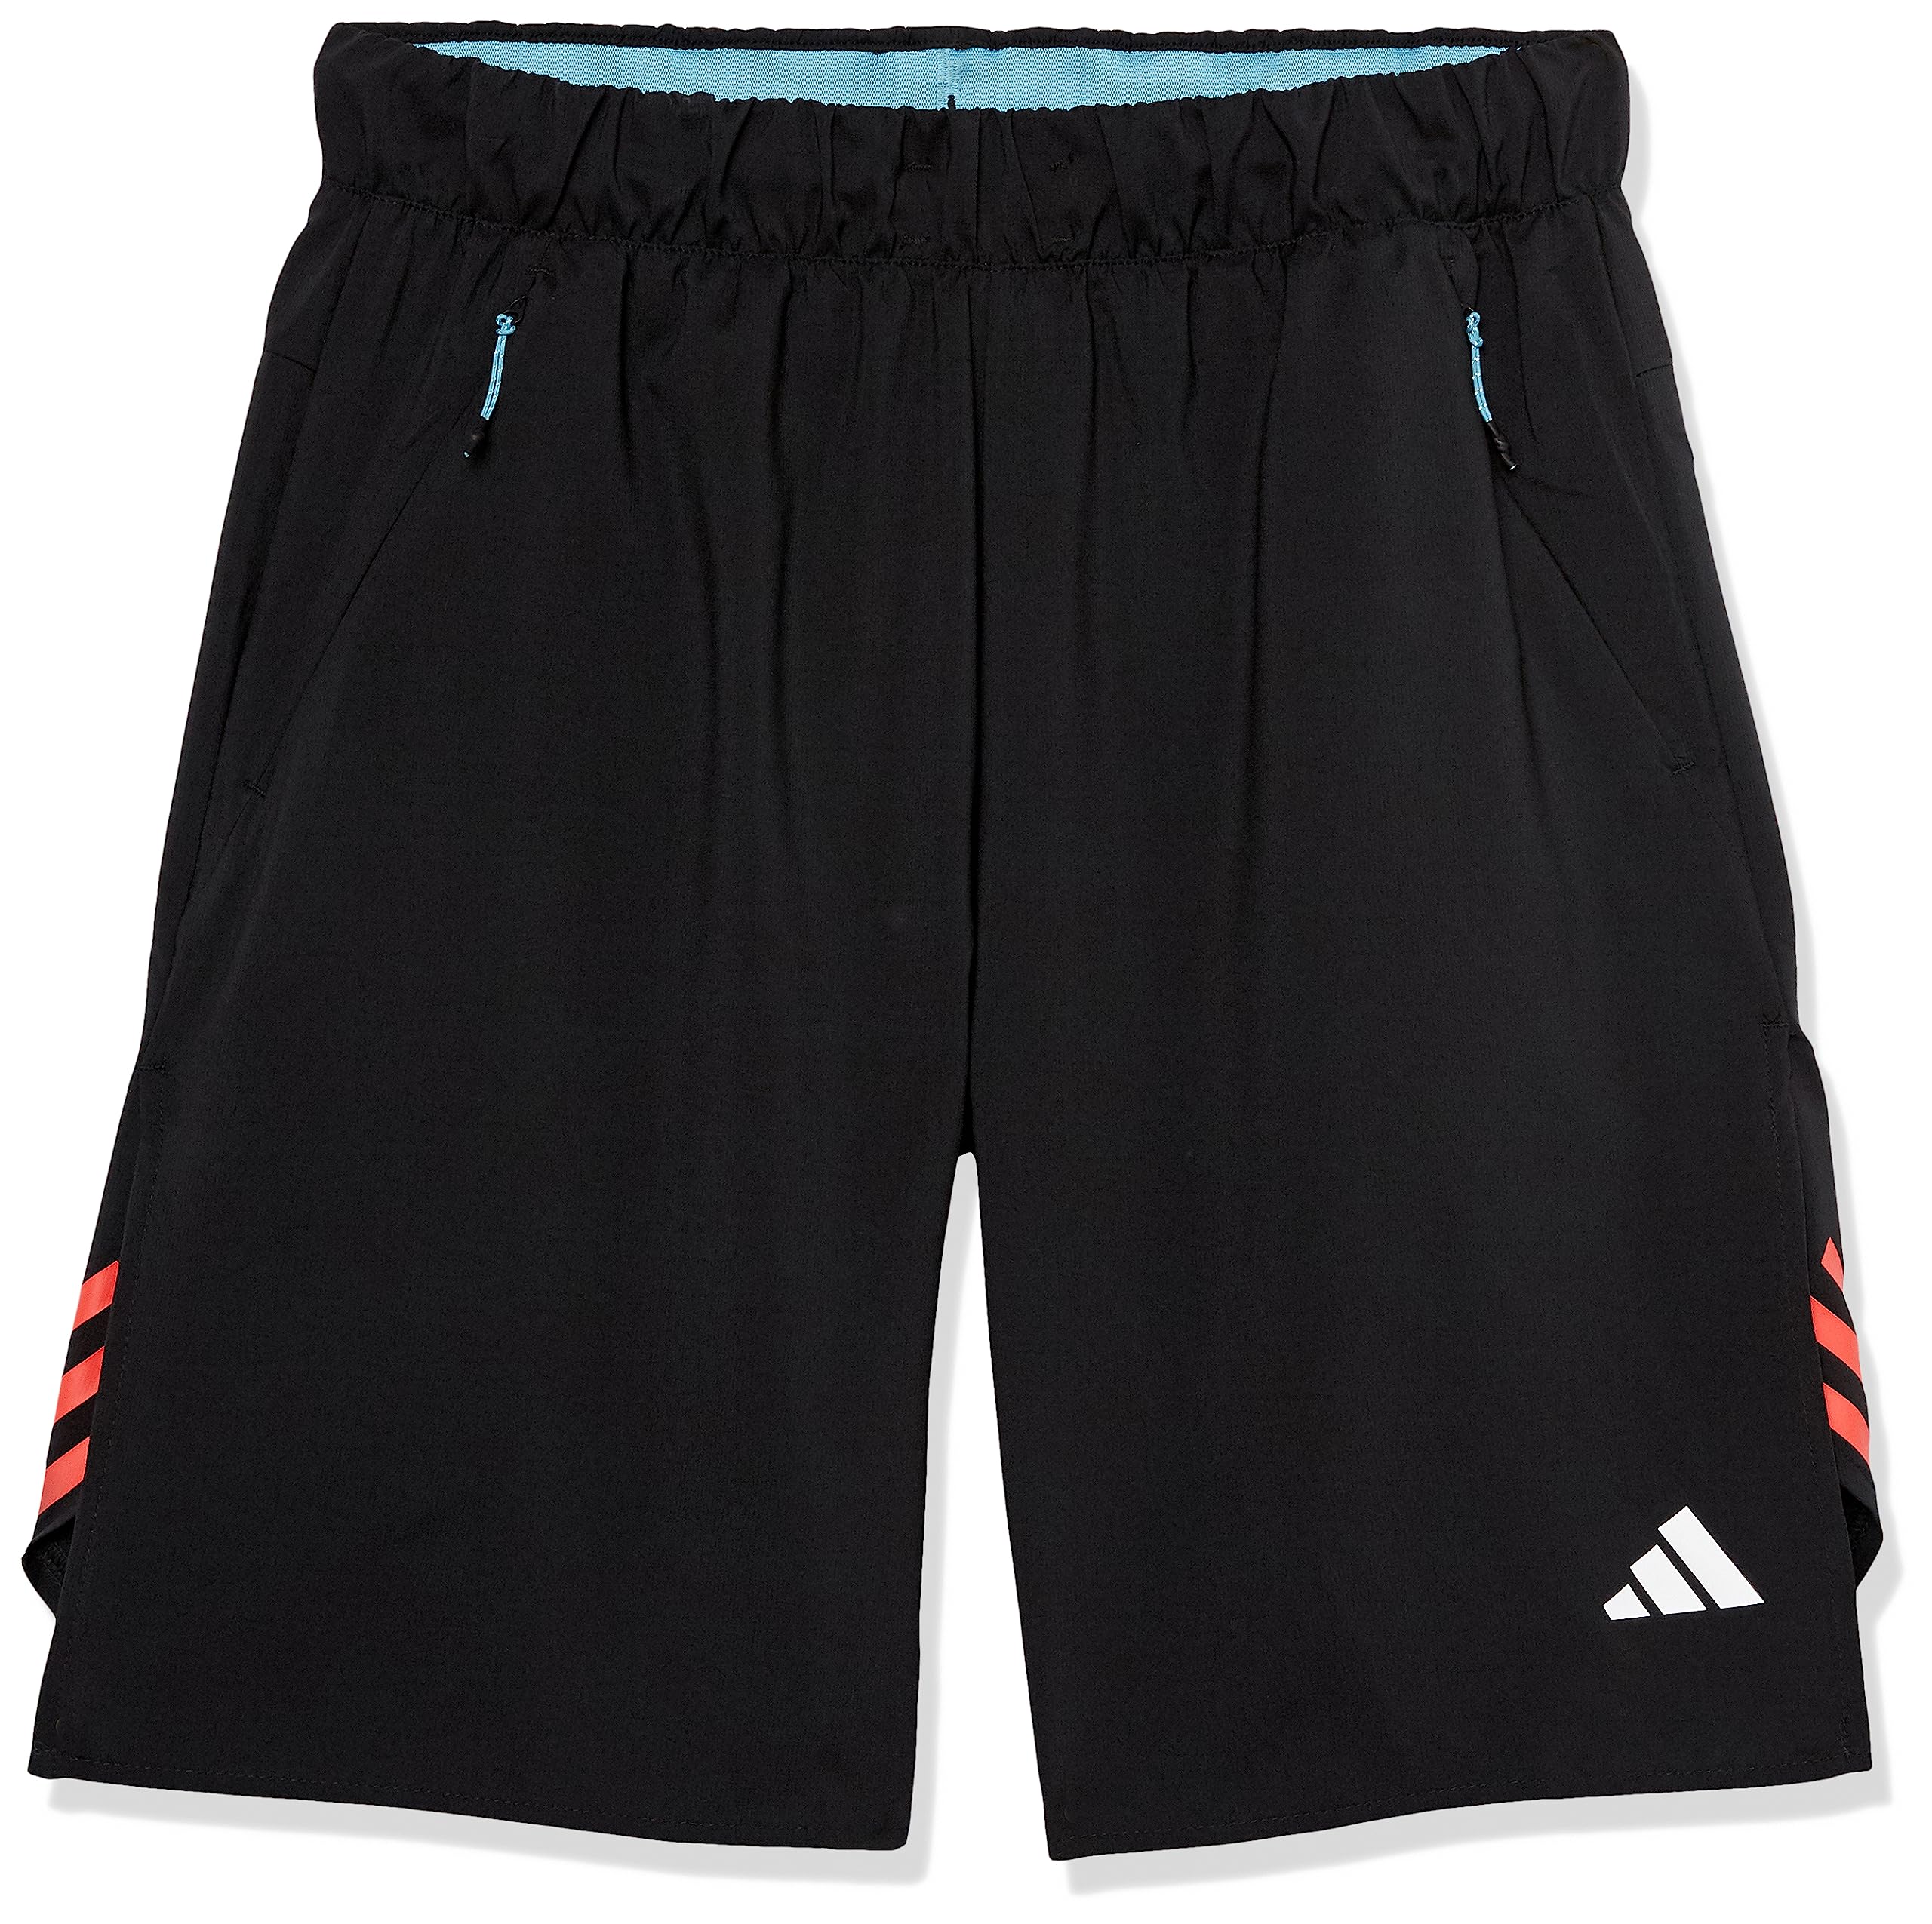 adidas Men's Trainicons 3 Stripe Training Shorts Now Only $6.69